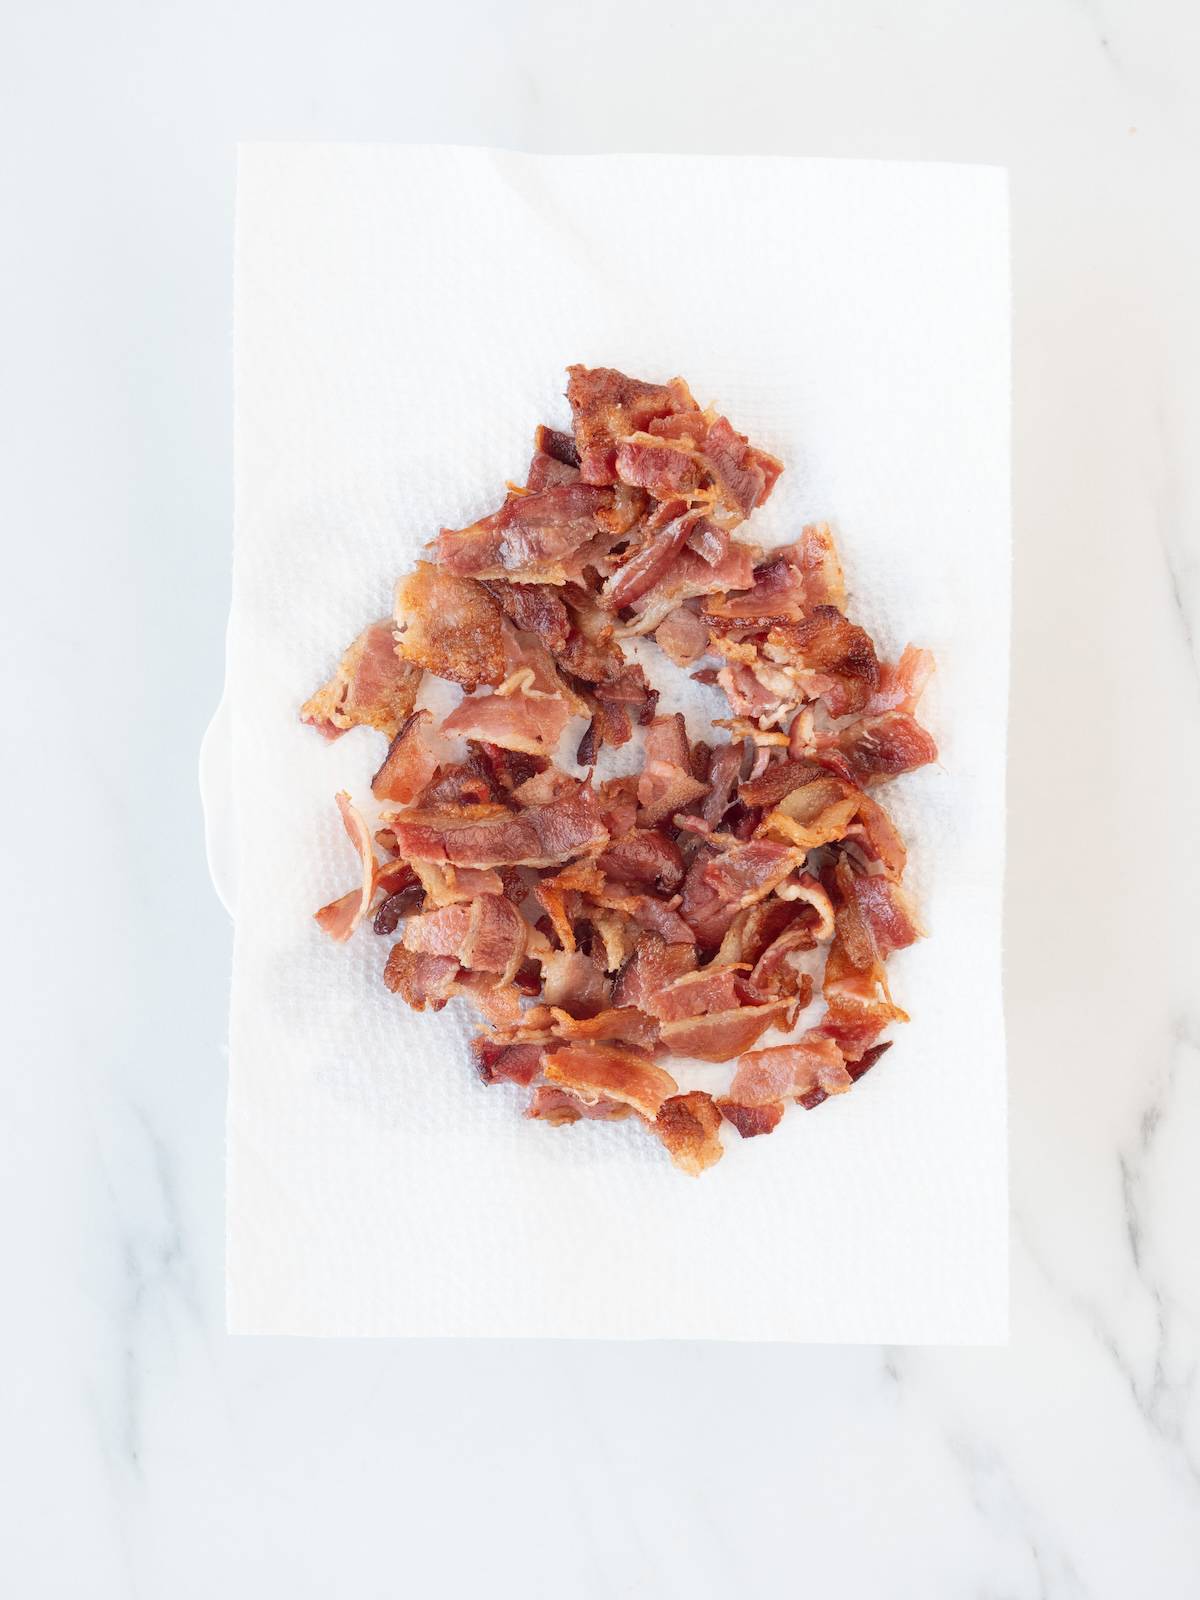 A tissue paper laid out on the kitchen counter, with cooked bacon on it that has been torn into small pieces.